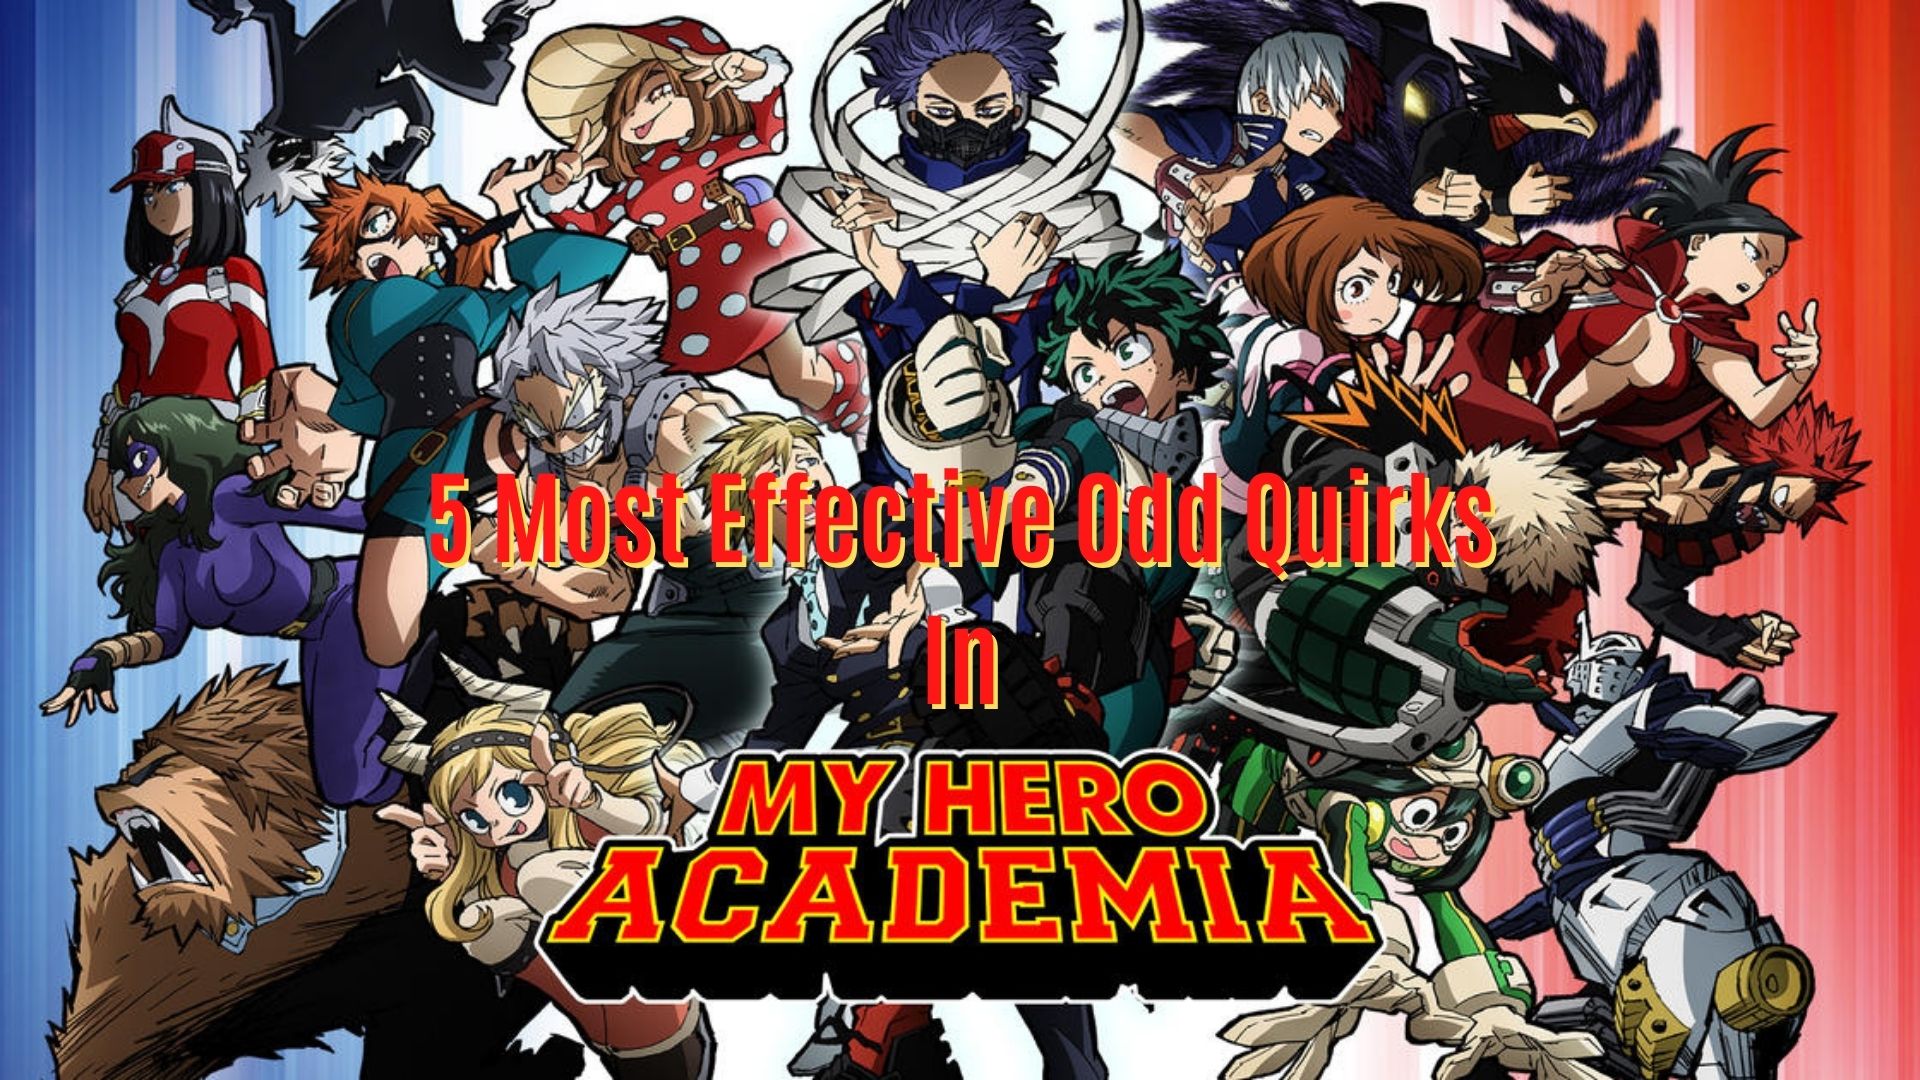 My Hero Academia’s Five Most Effective Odd Quirks